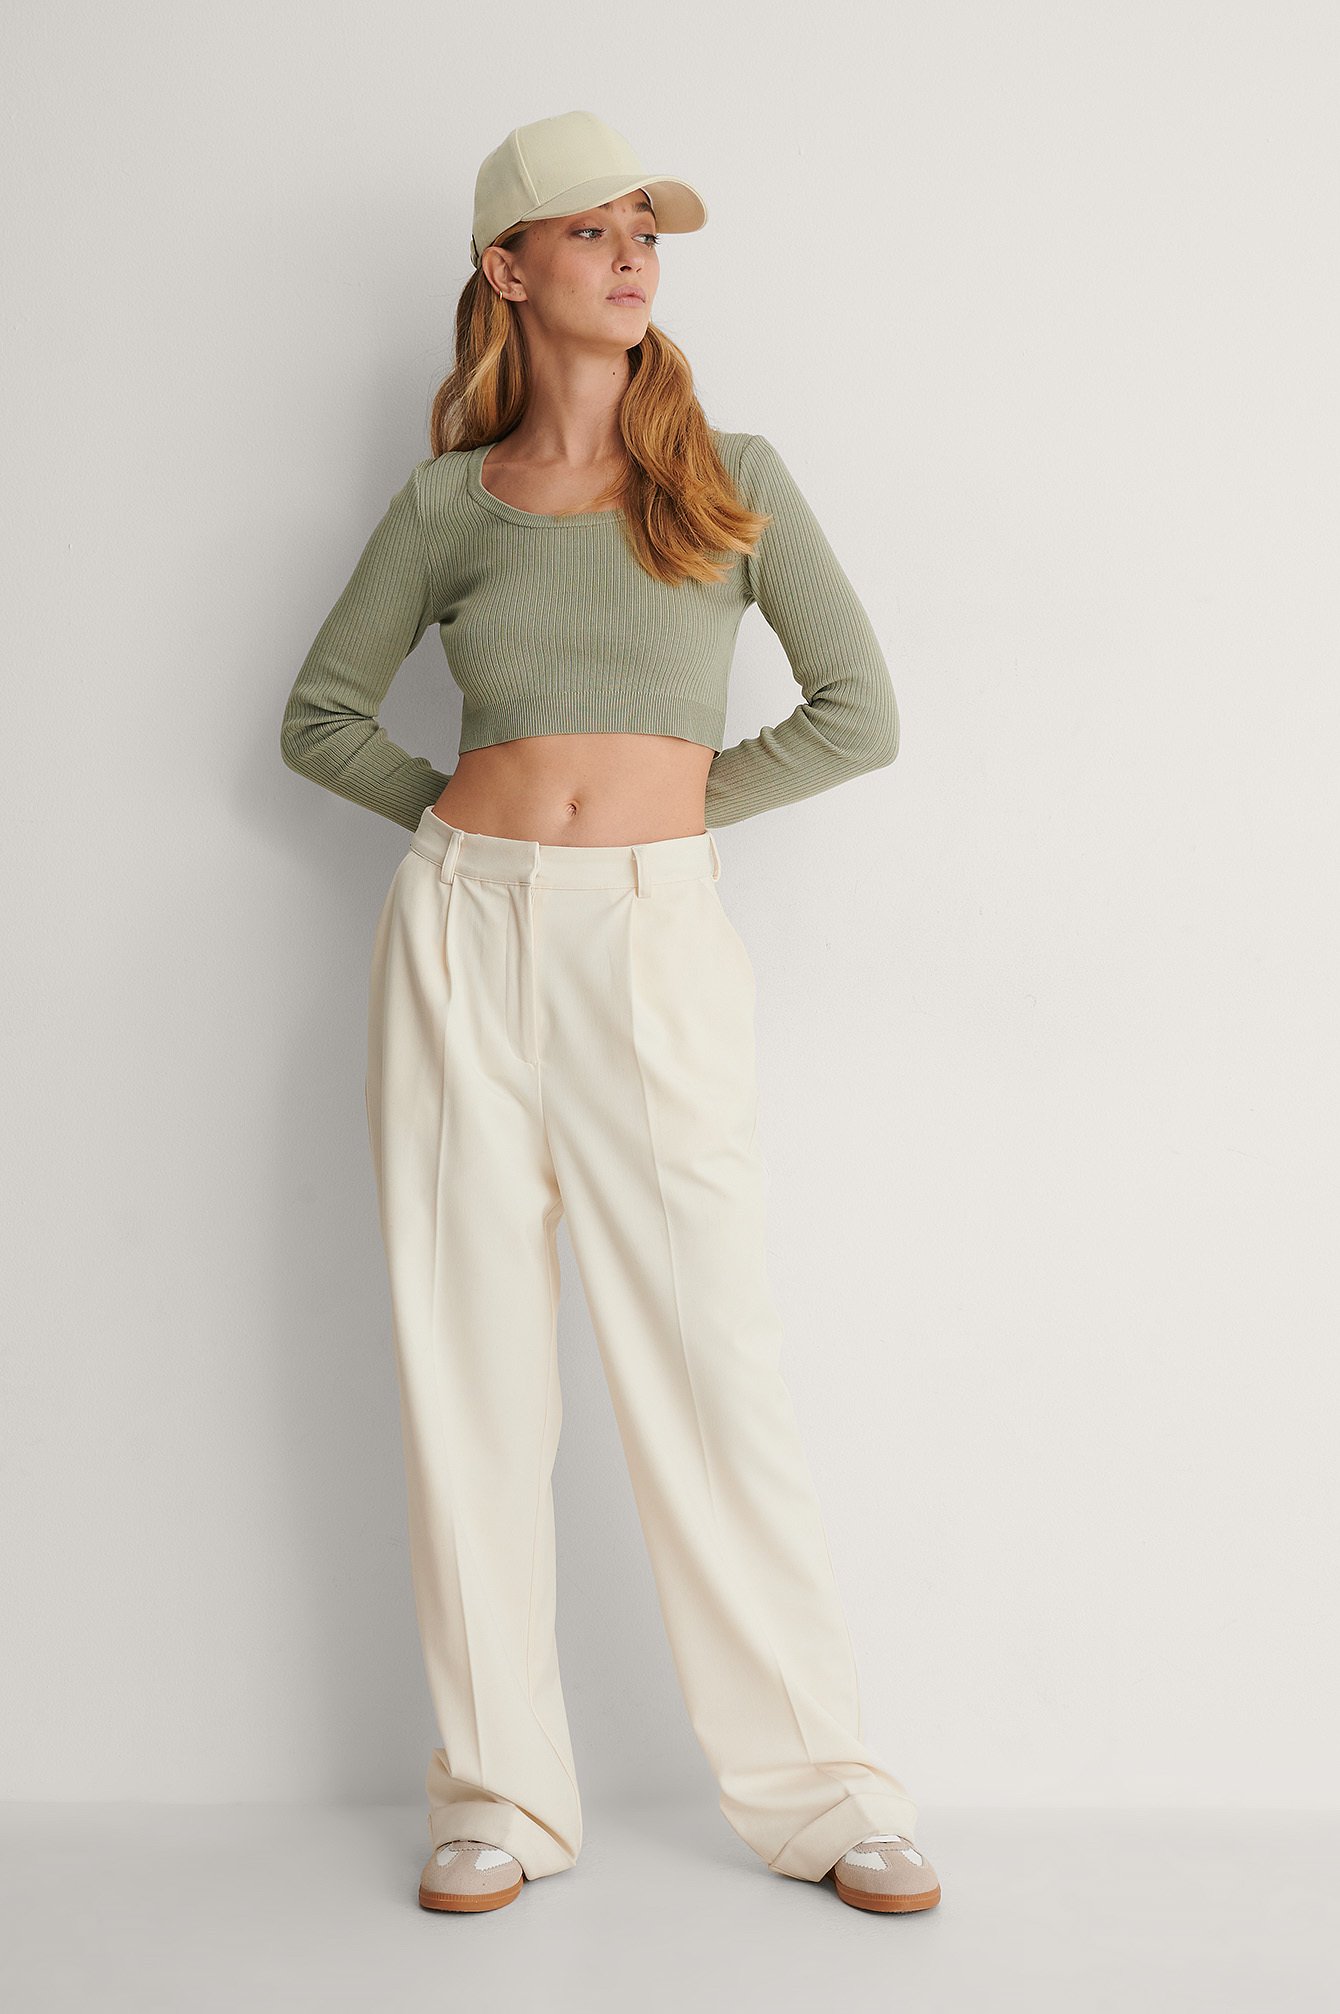 Deep Round Neck Cropped Knitted Top Outfit